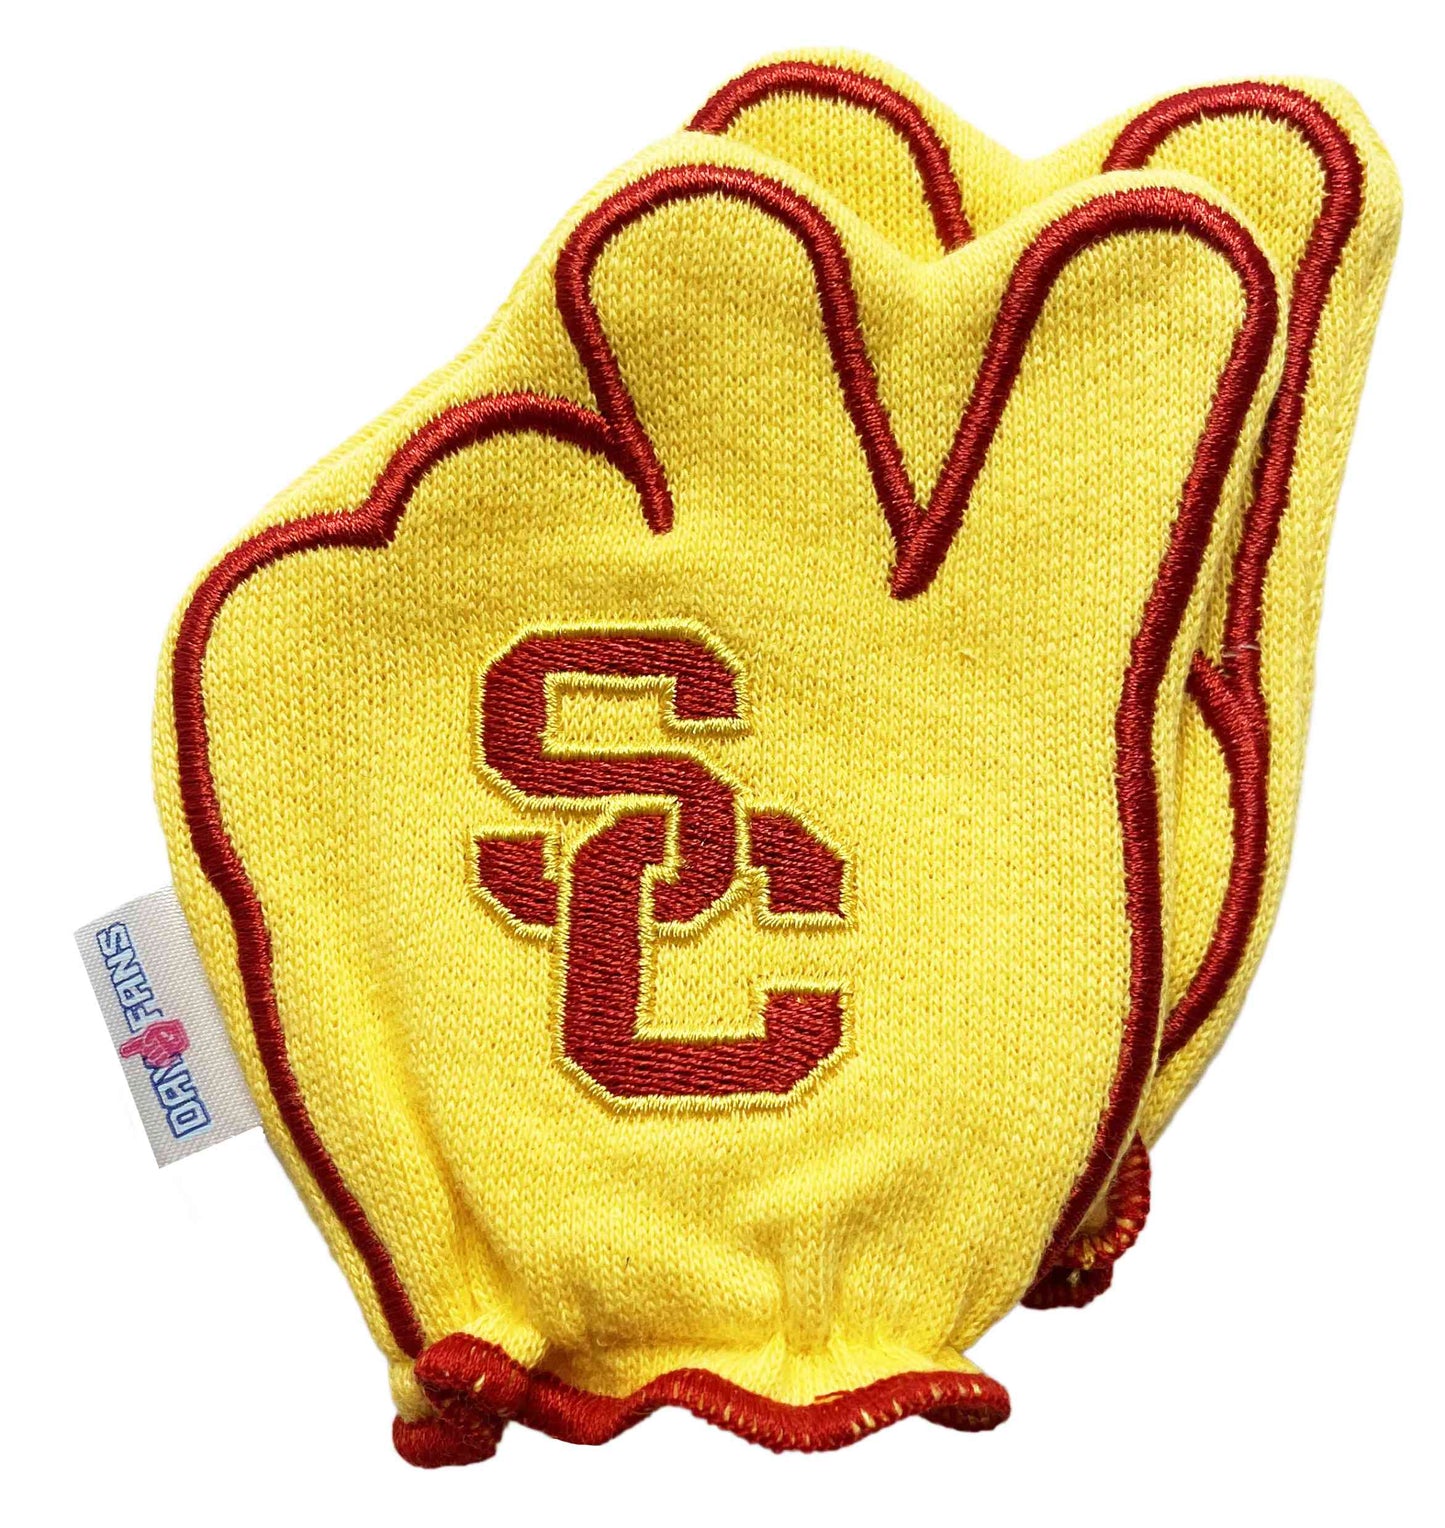 USC Fight On FanMitts Baby Mittens Gold Back Pair Stacked